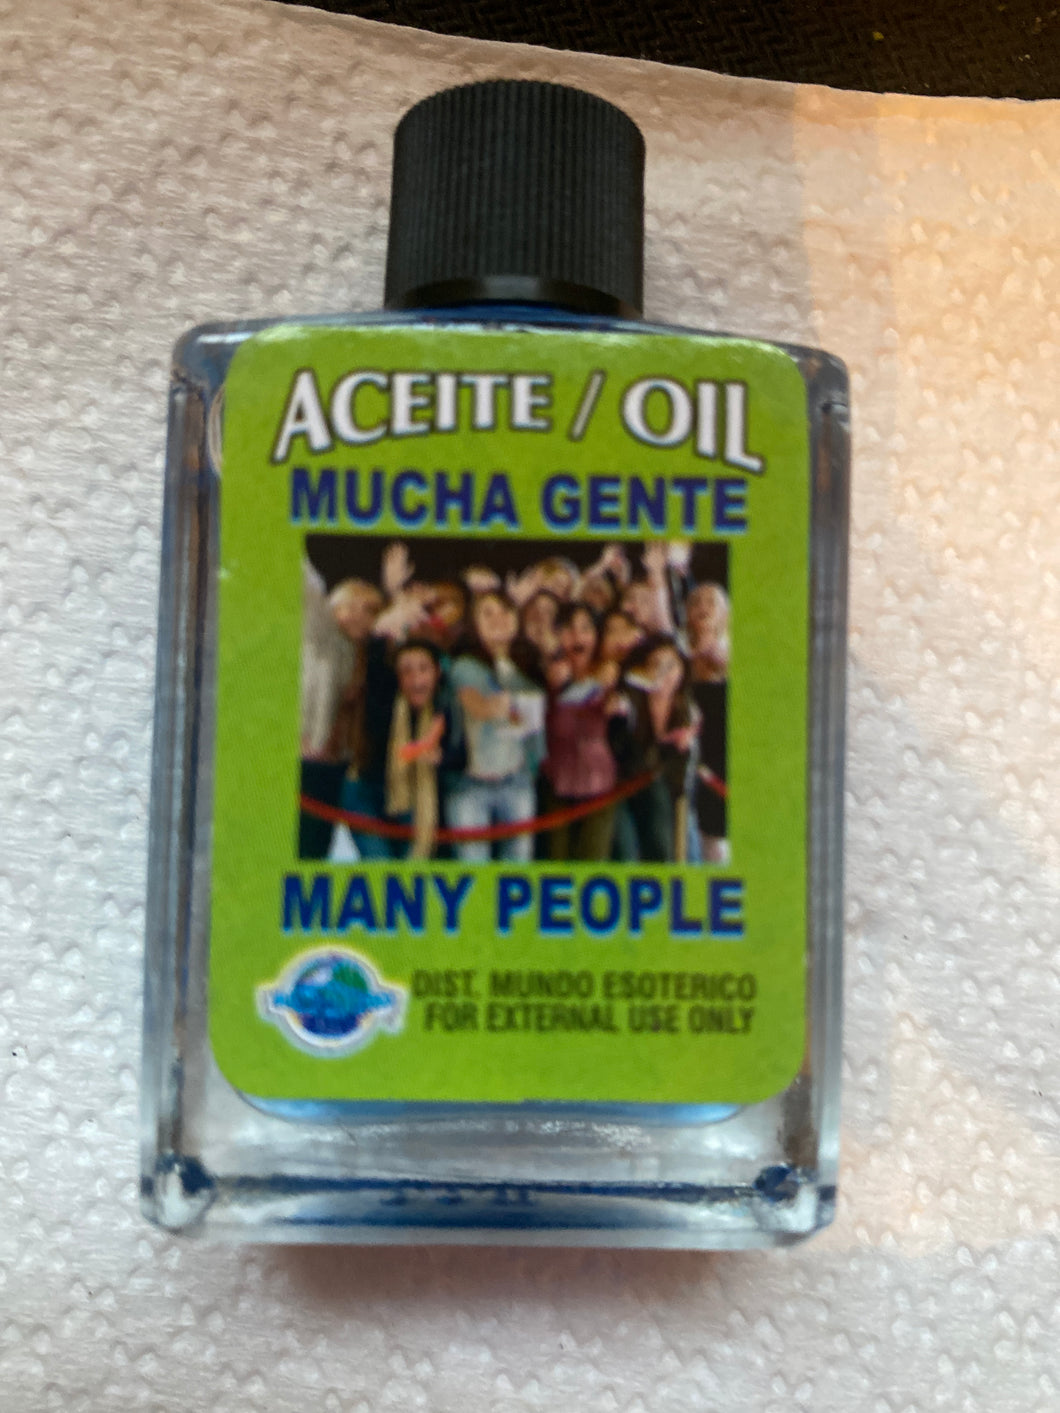 Many People oil